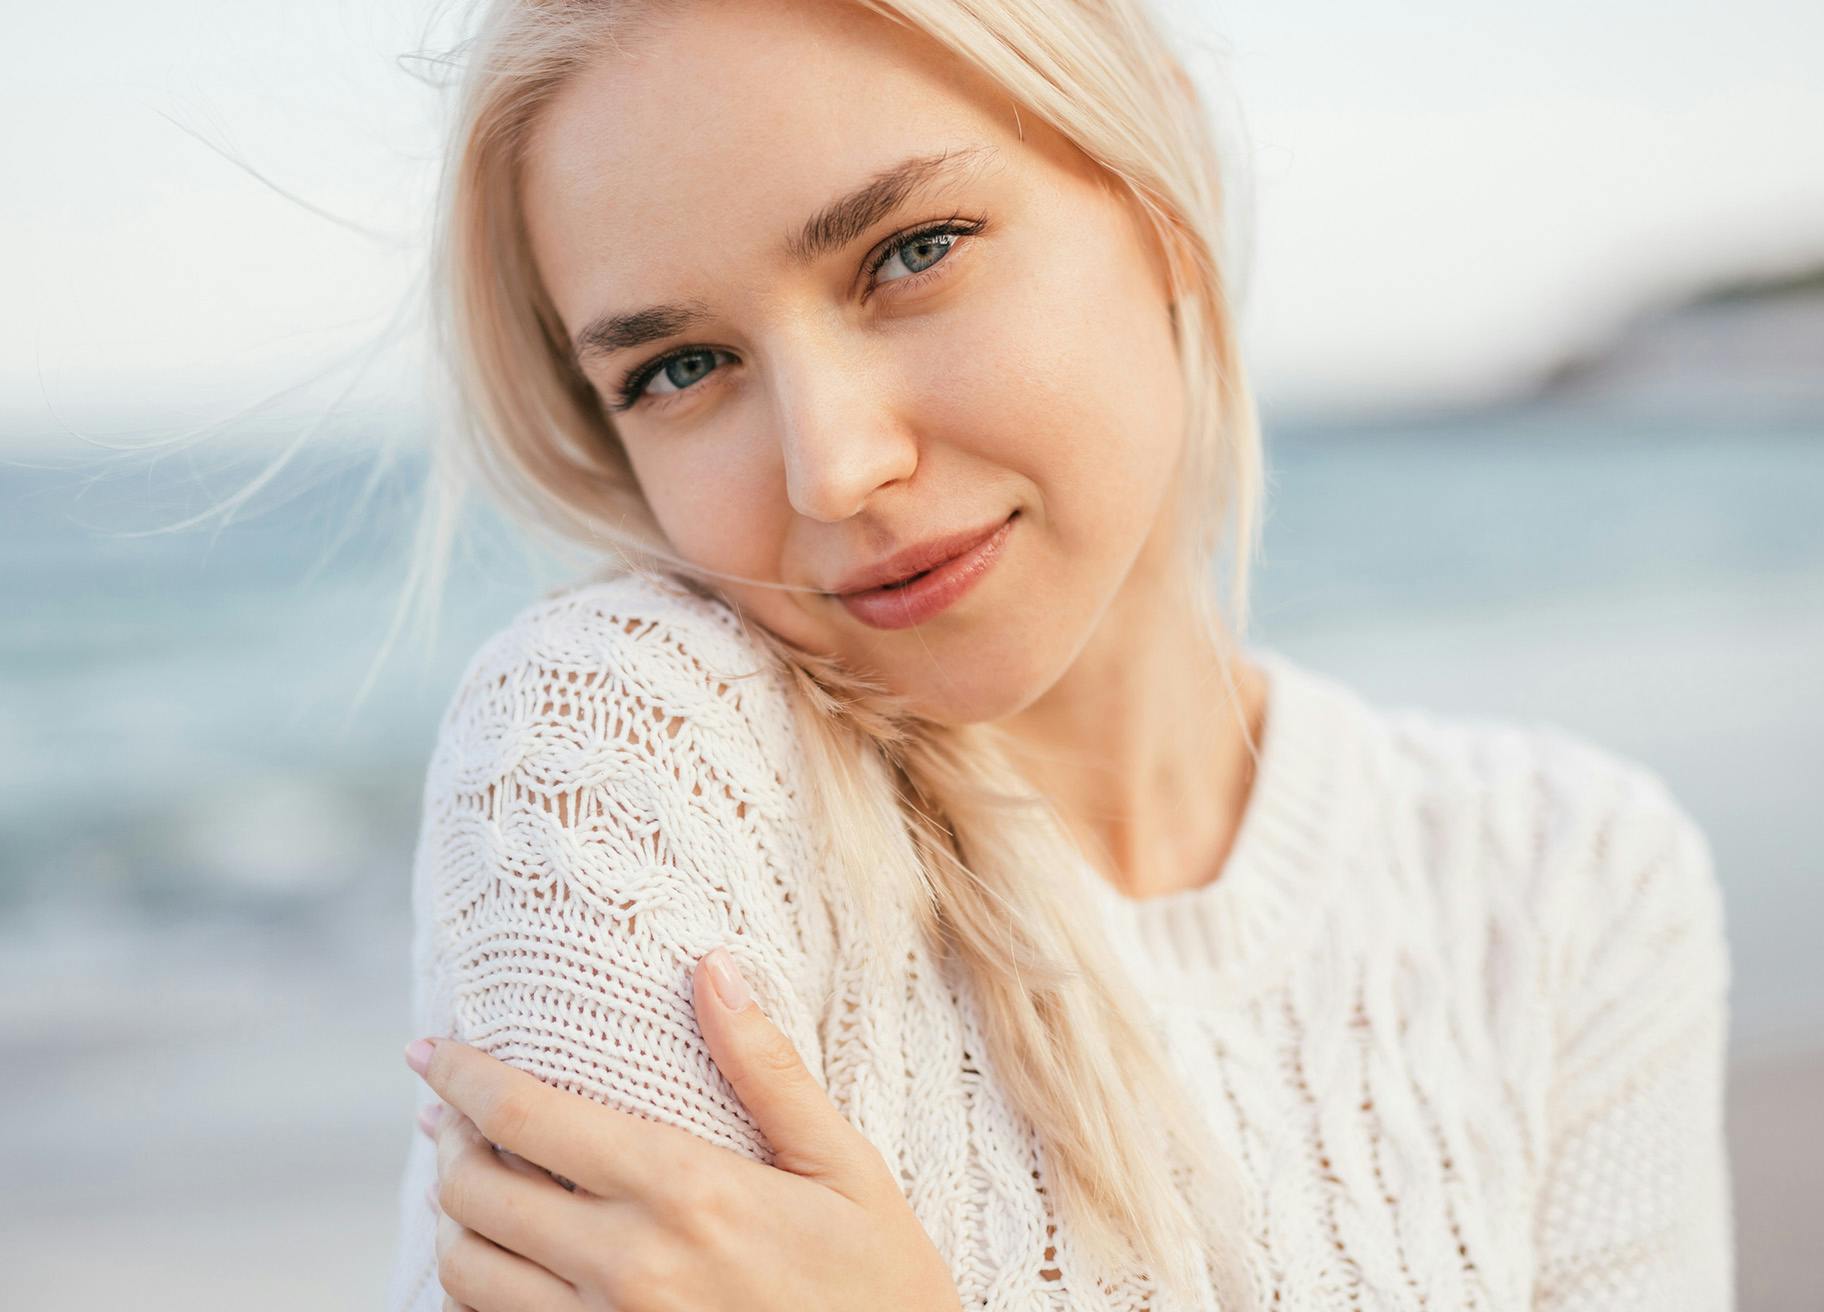 Woman with blonde hair wearing a white sweater